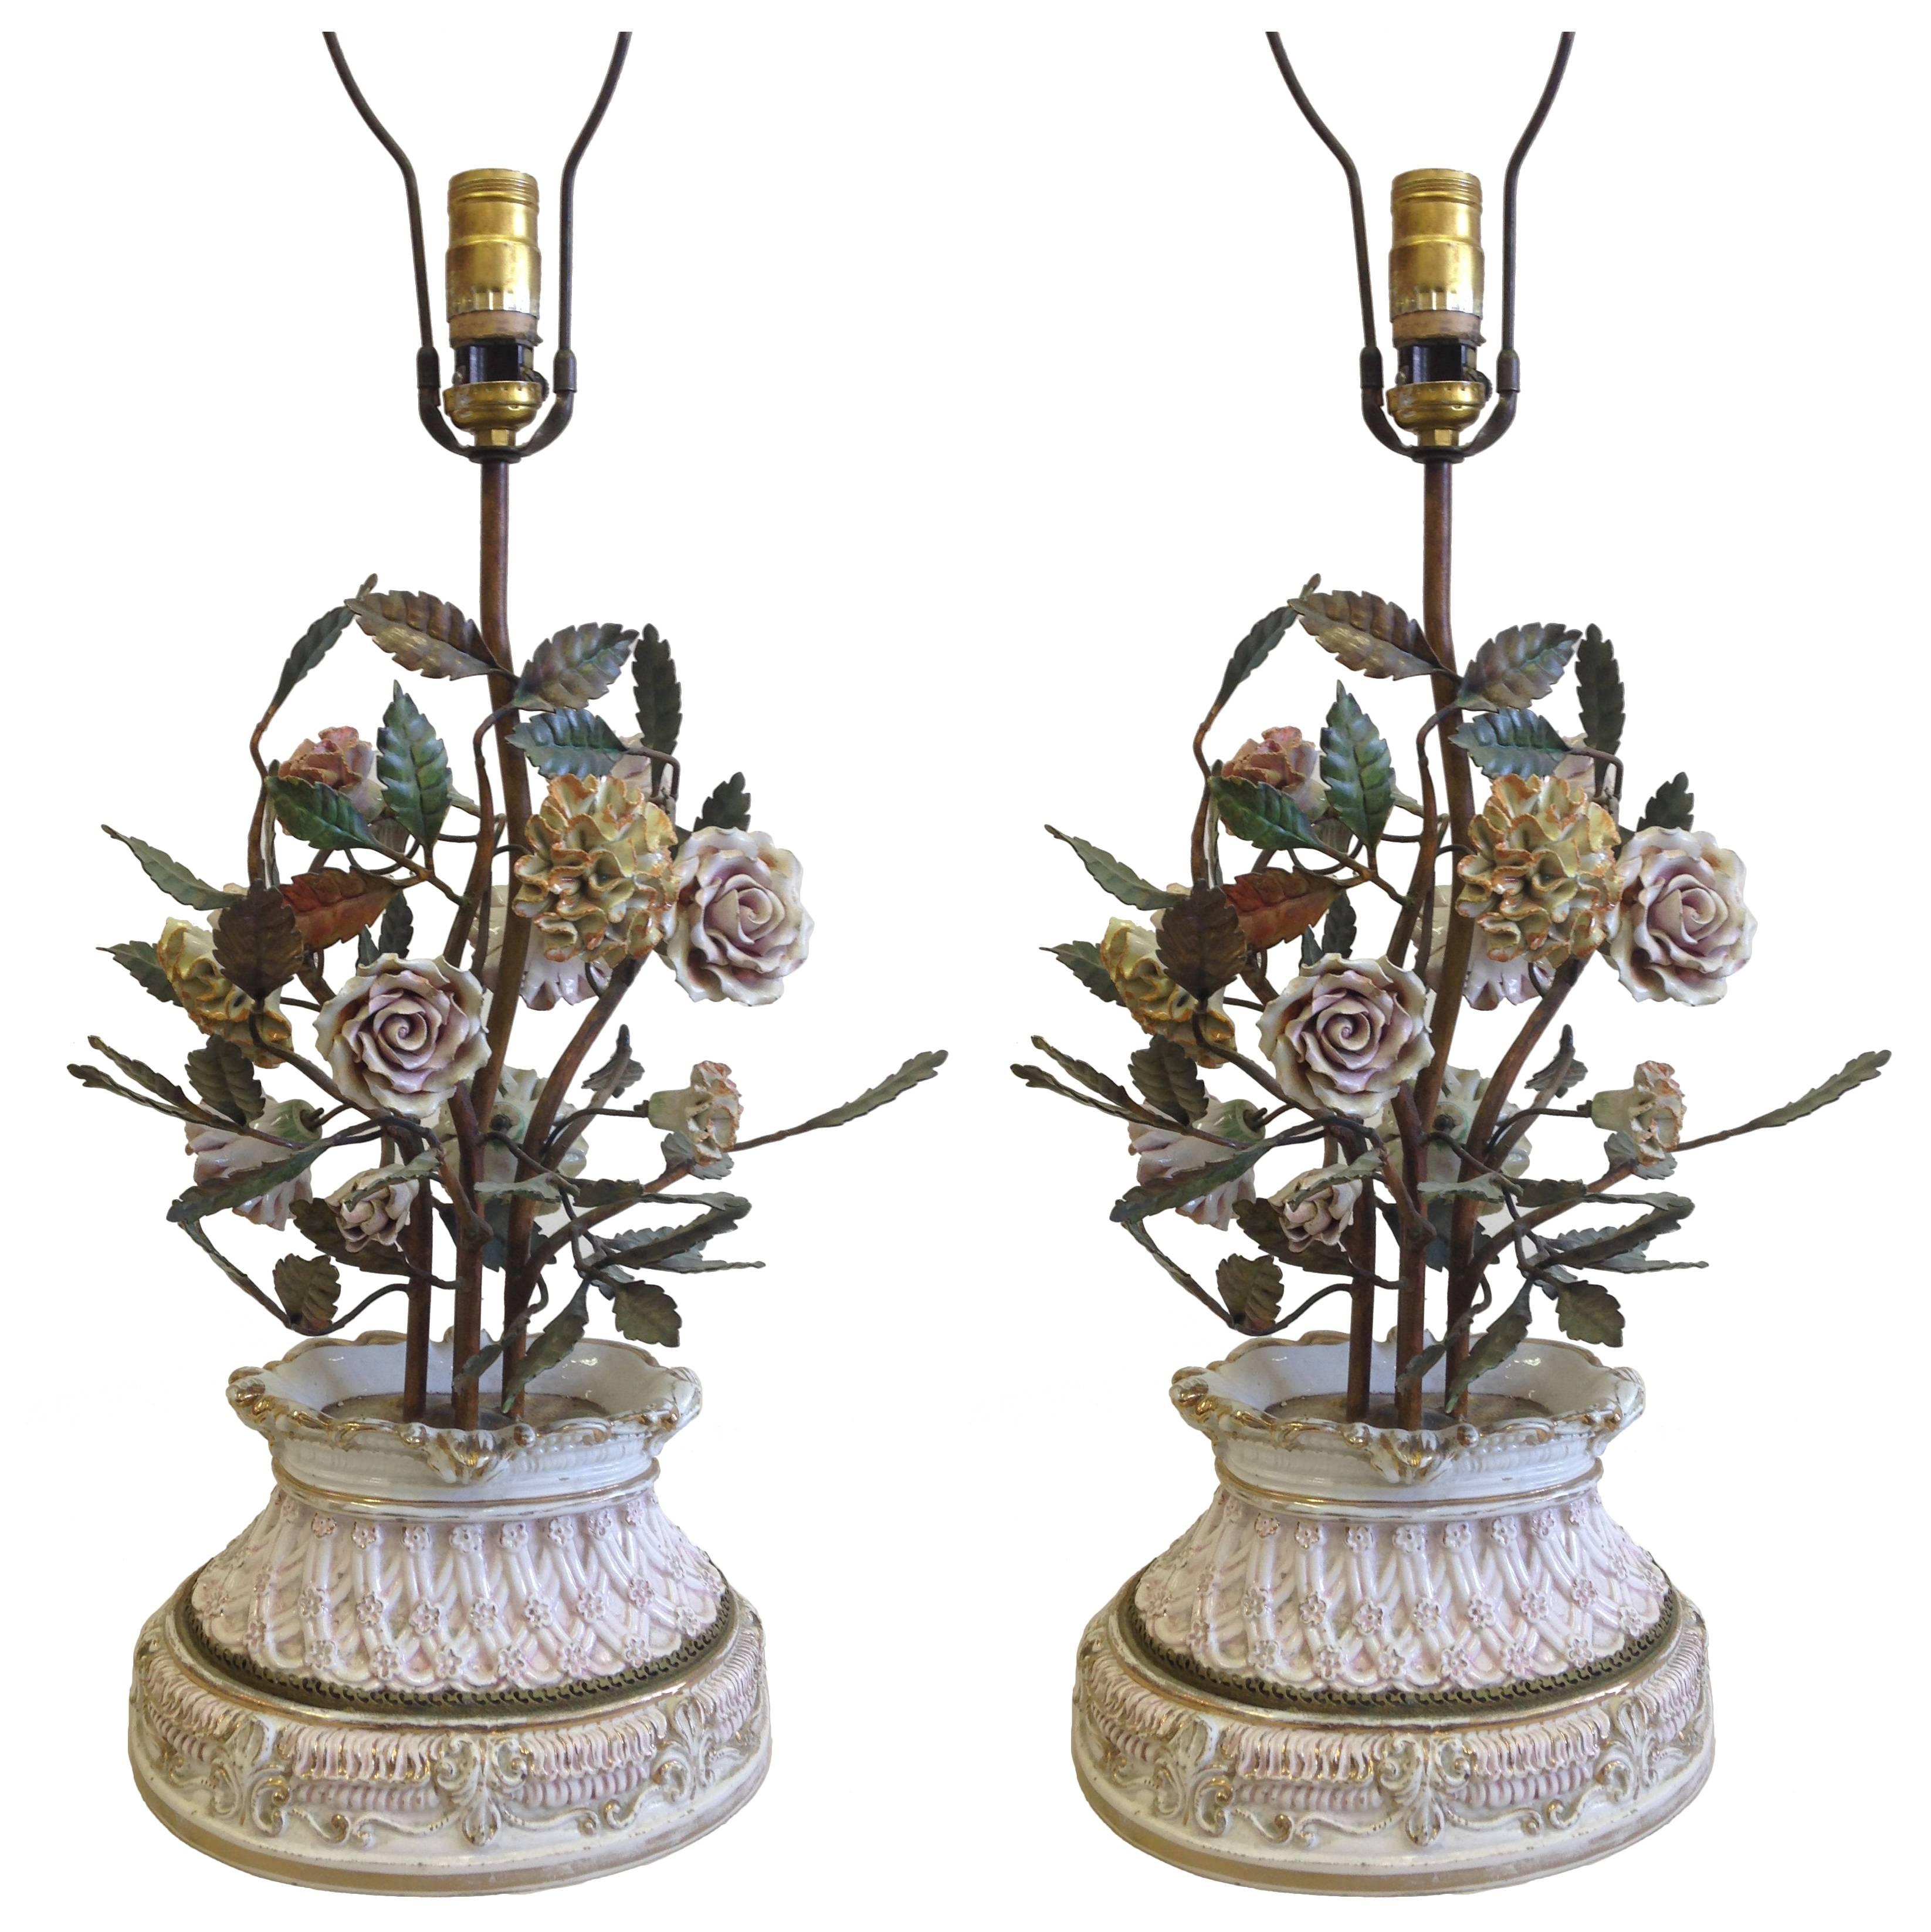 Pair of Italian Hand Made Floral Table Lamps by Capodimonte, Italy, 1950